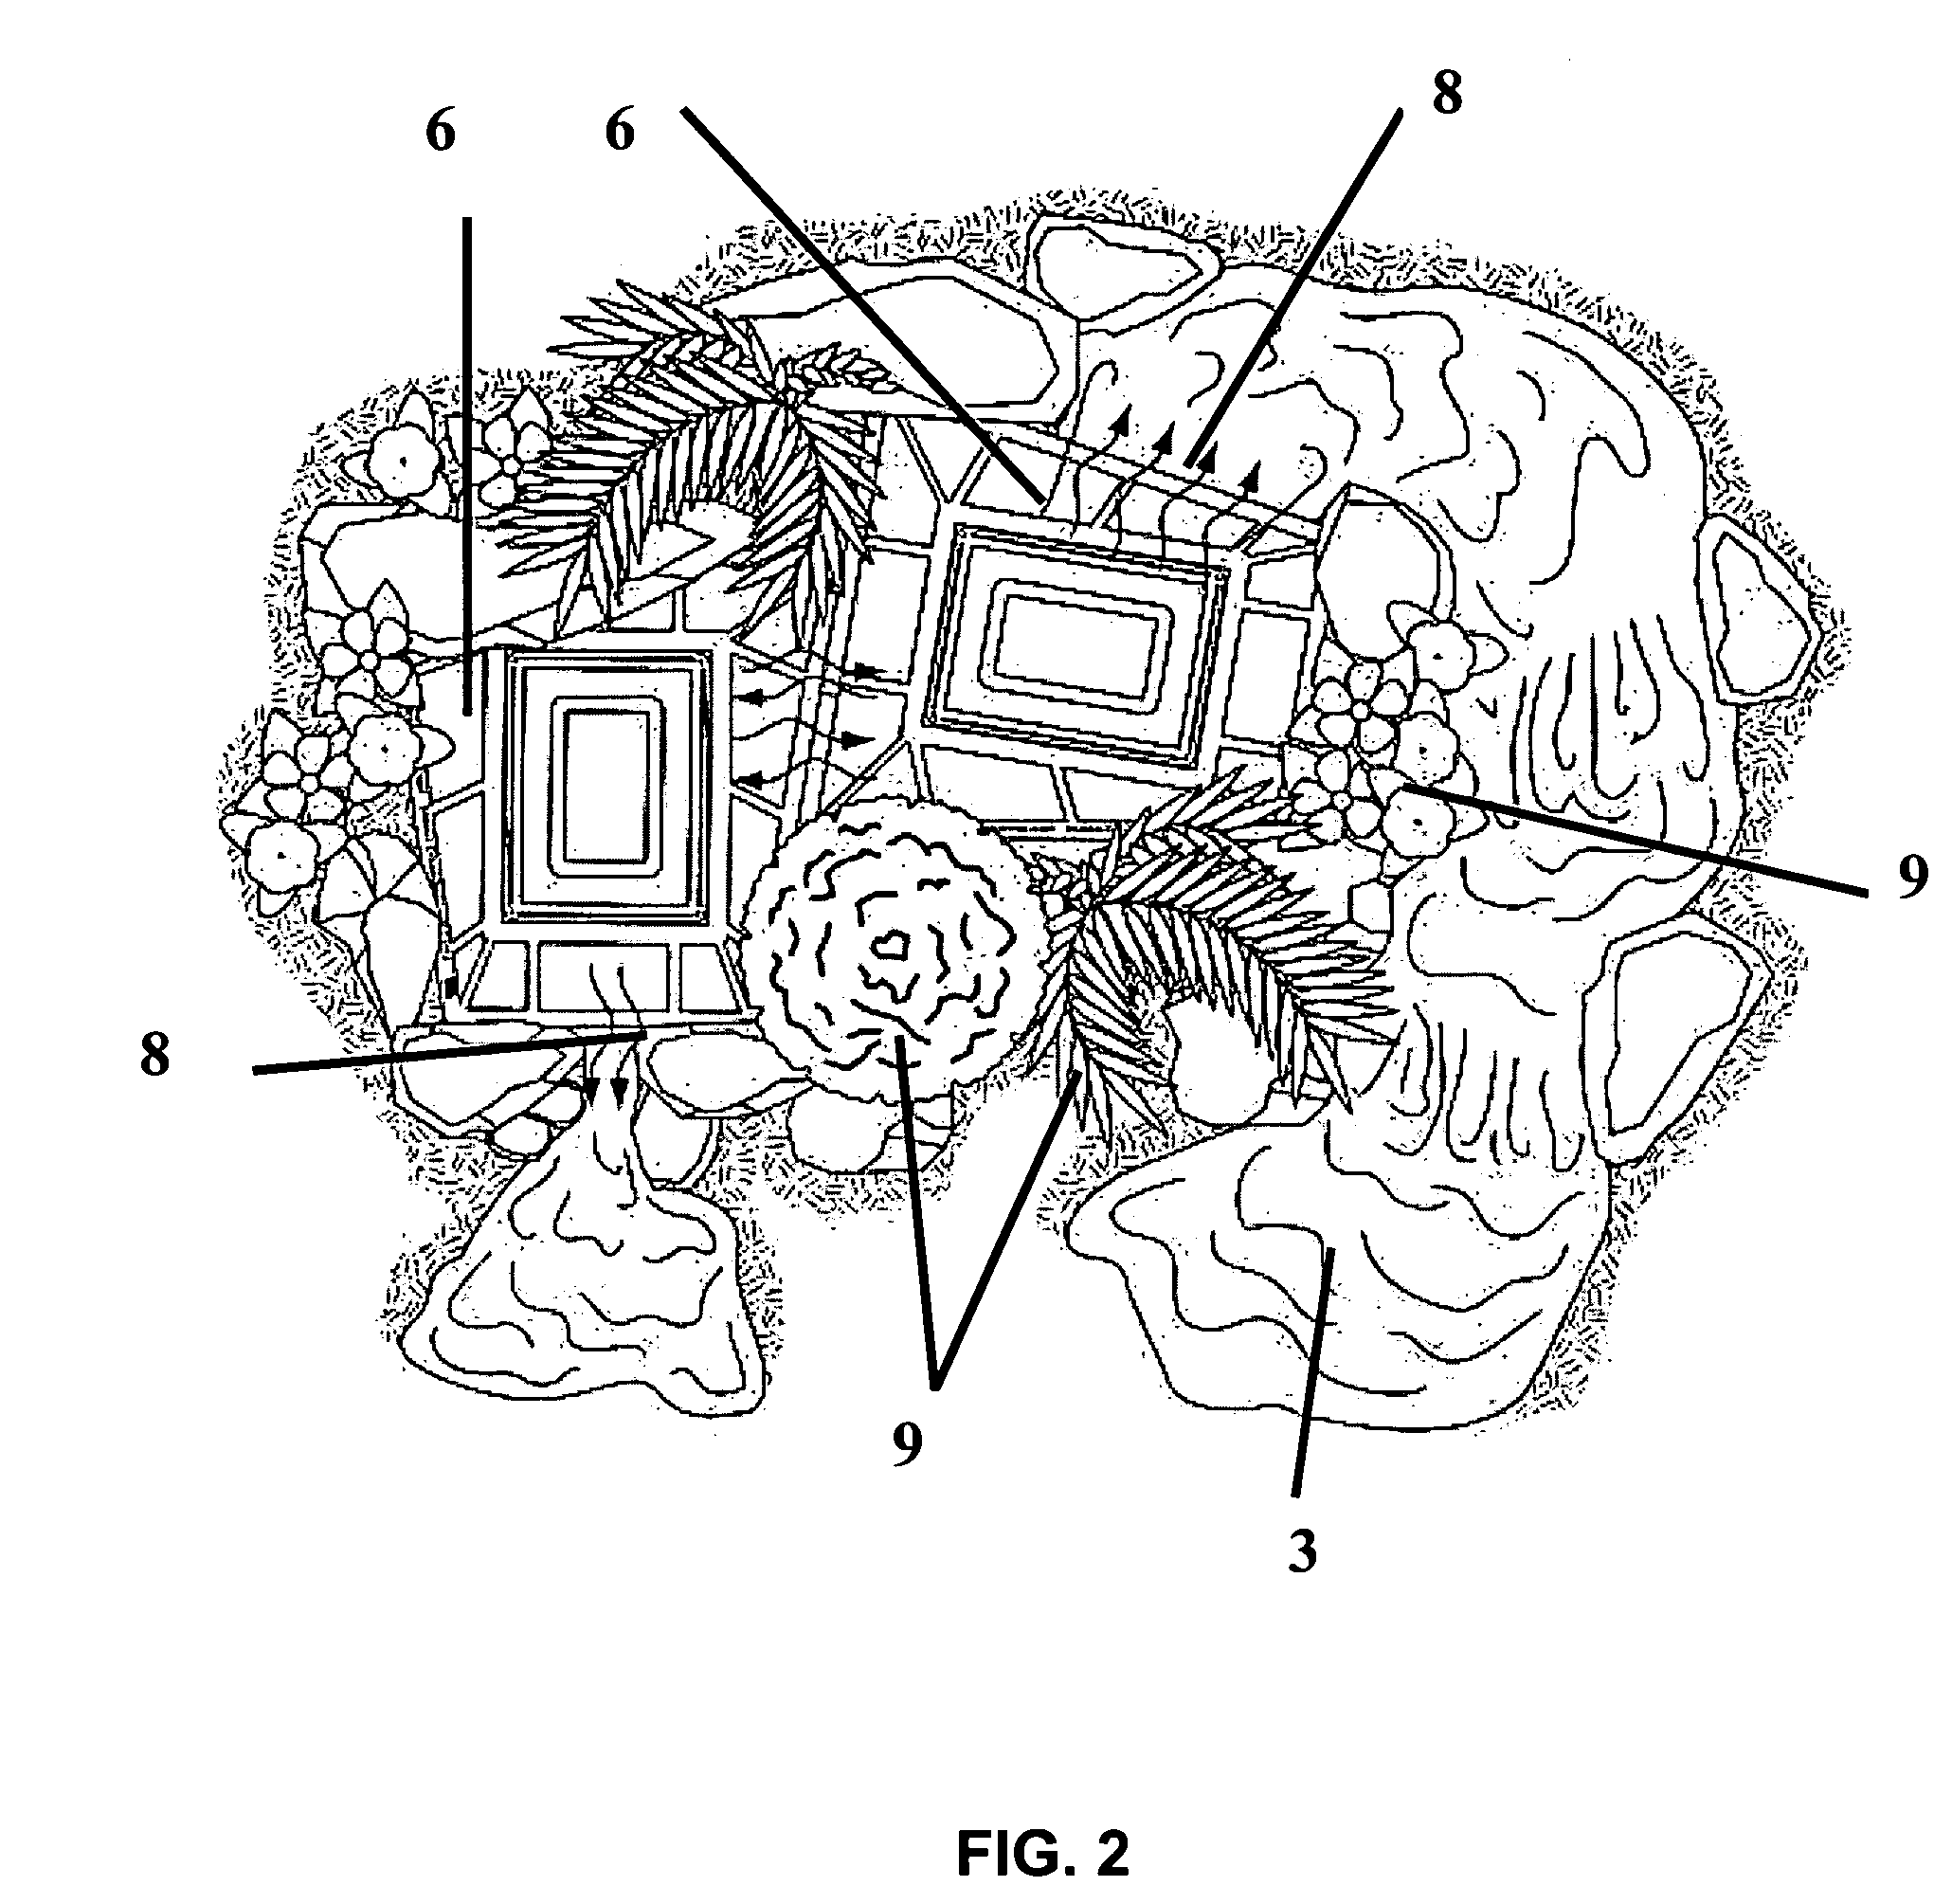 Landscaping pond system and method with variable opening falls and tesserae geometry